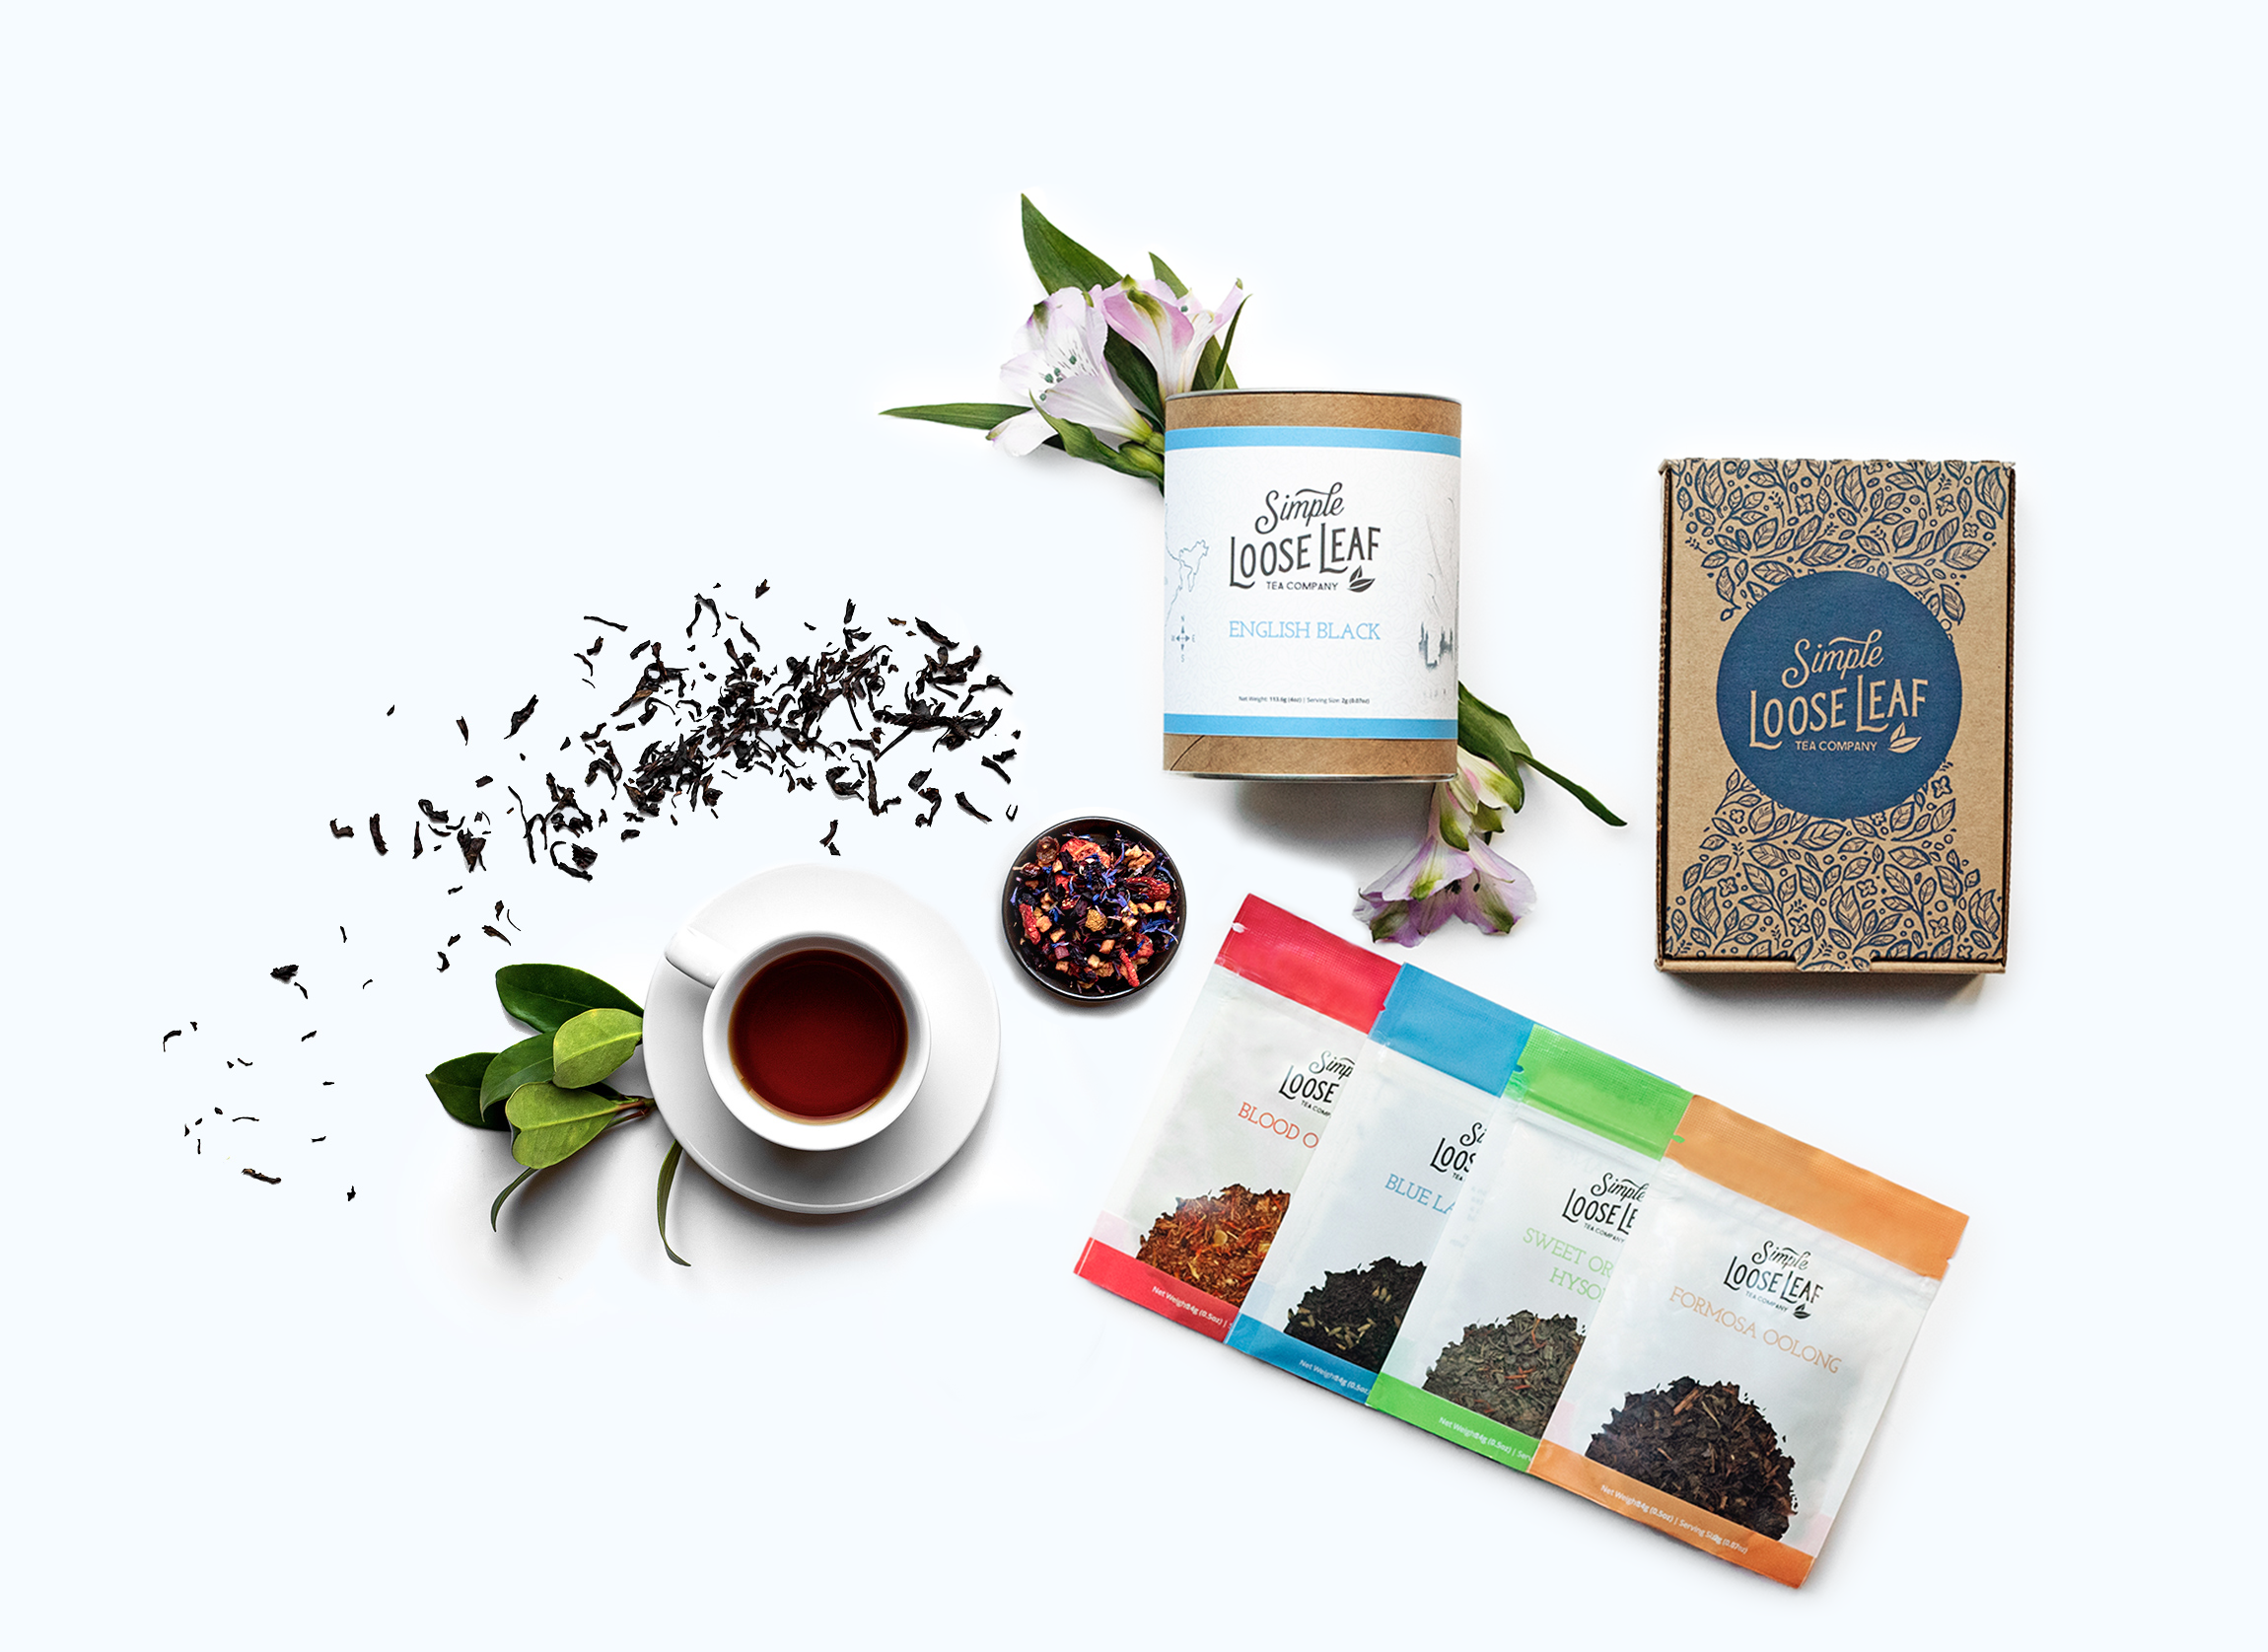 Simple Loose Leaf Tea Deal – Free Sample Kit When You Purchase Worth $10+